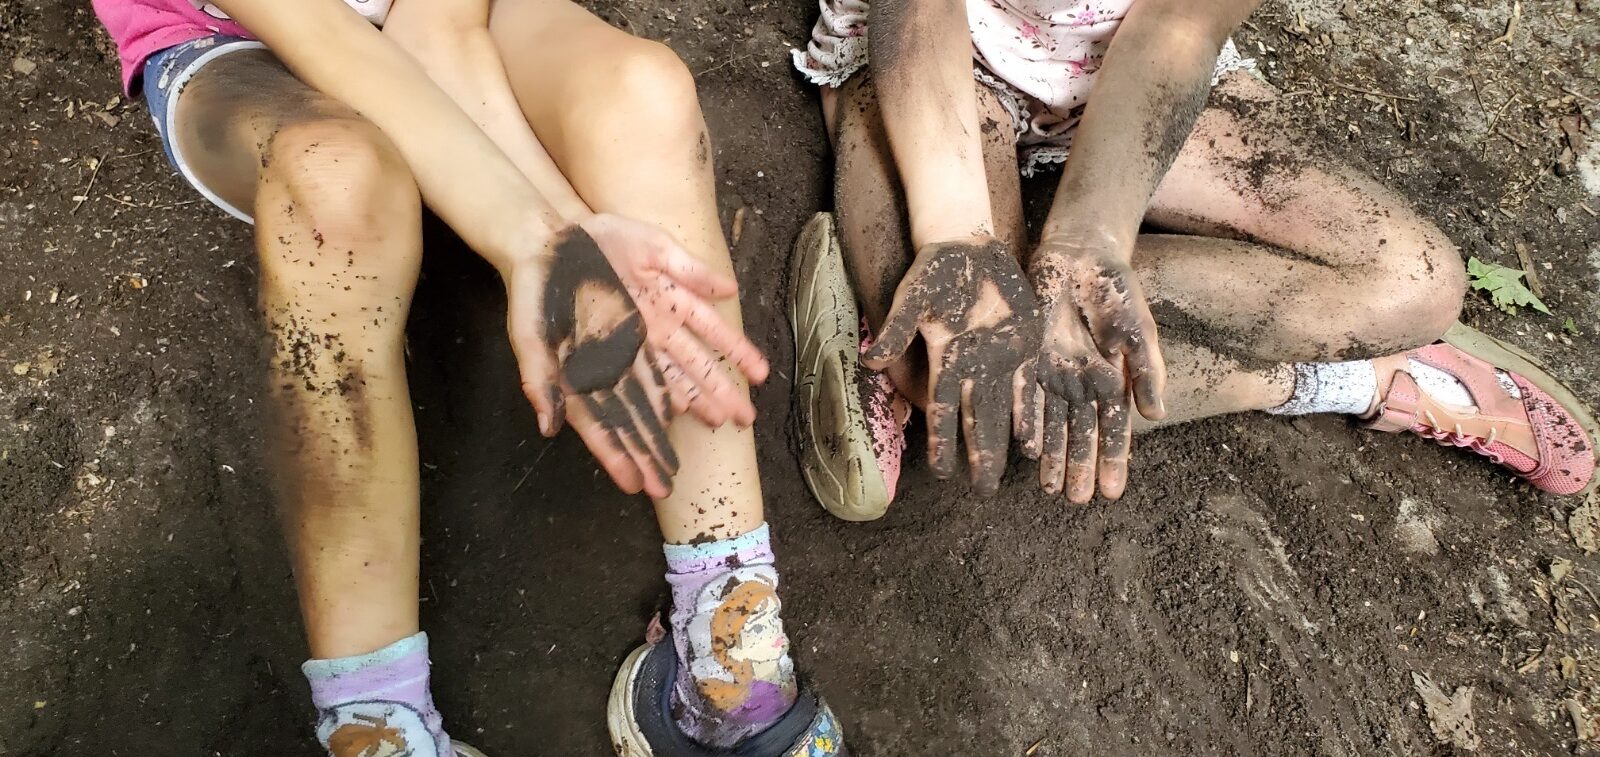 Two pairs of hands in dirt